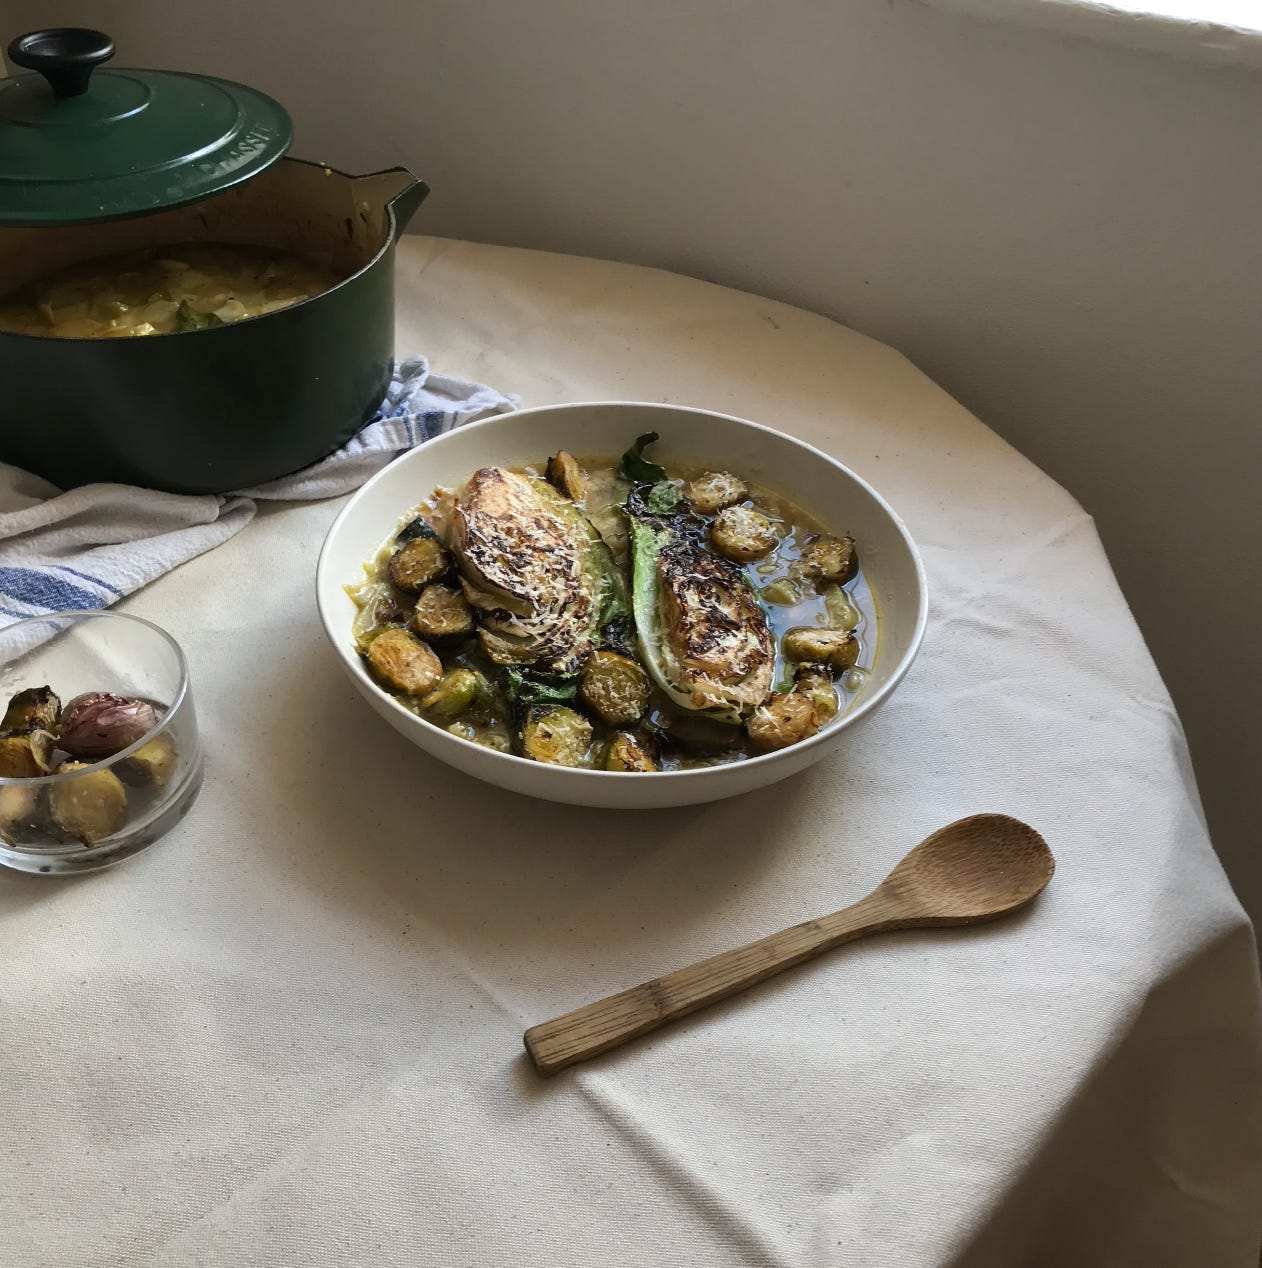 A photo of a large shallow dish on a table. Beside it, a bottle green casserole dish, lid half on, a wooden spoon, and a glass ramekin with potatoes in. In the bowl, a liquidy mix, yellow and green, are coins of courgette, and charred halves of hispi cabbage. 